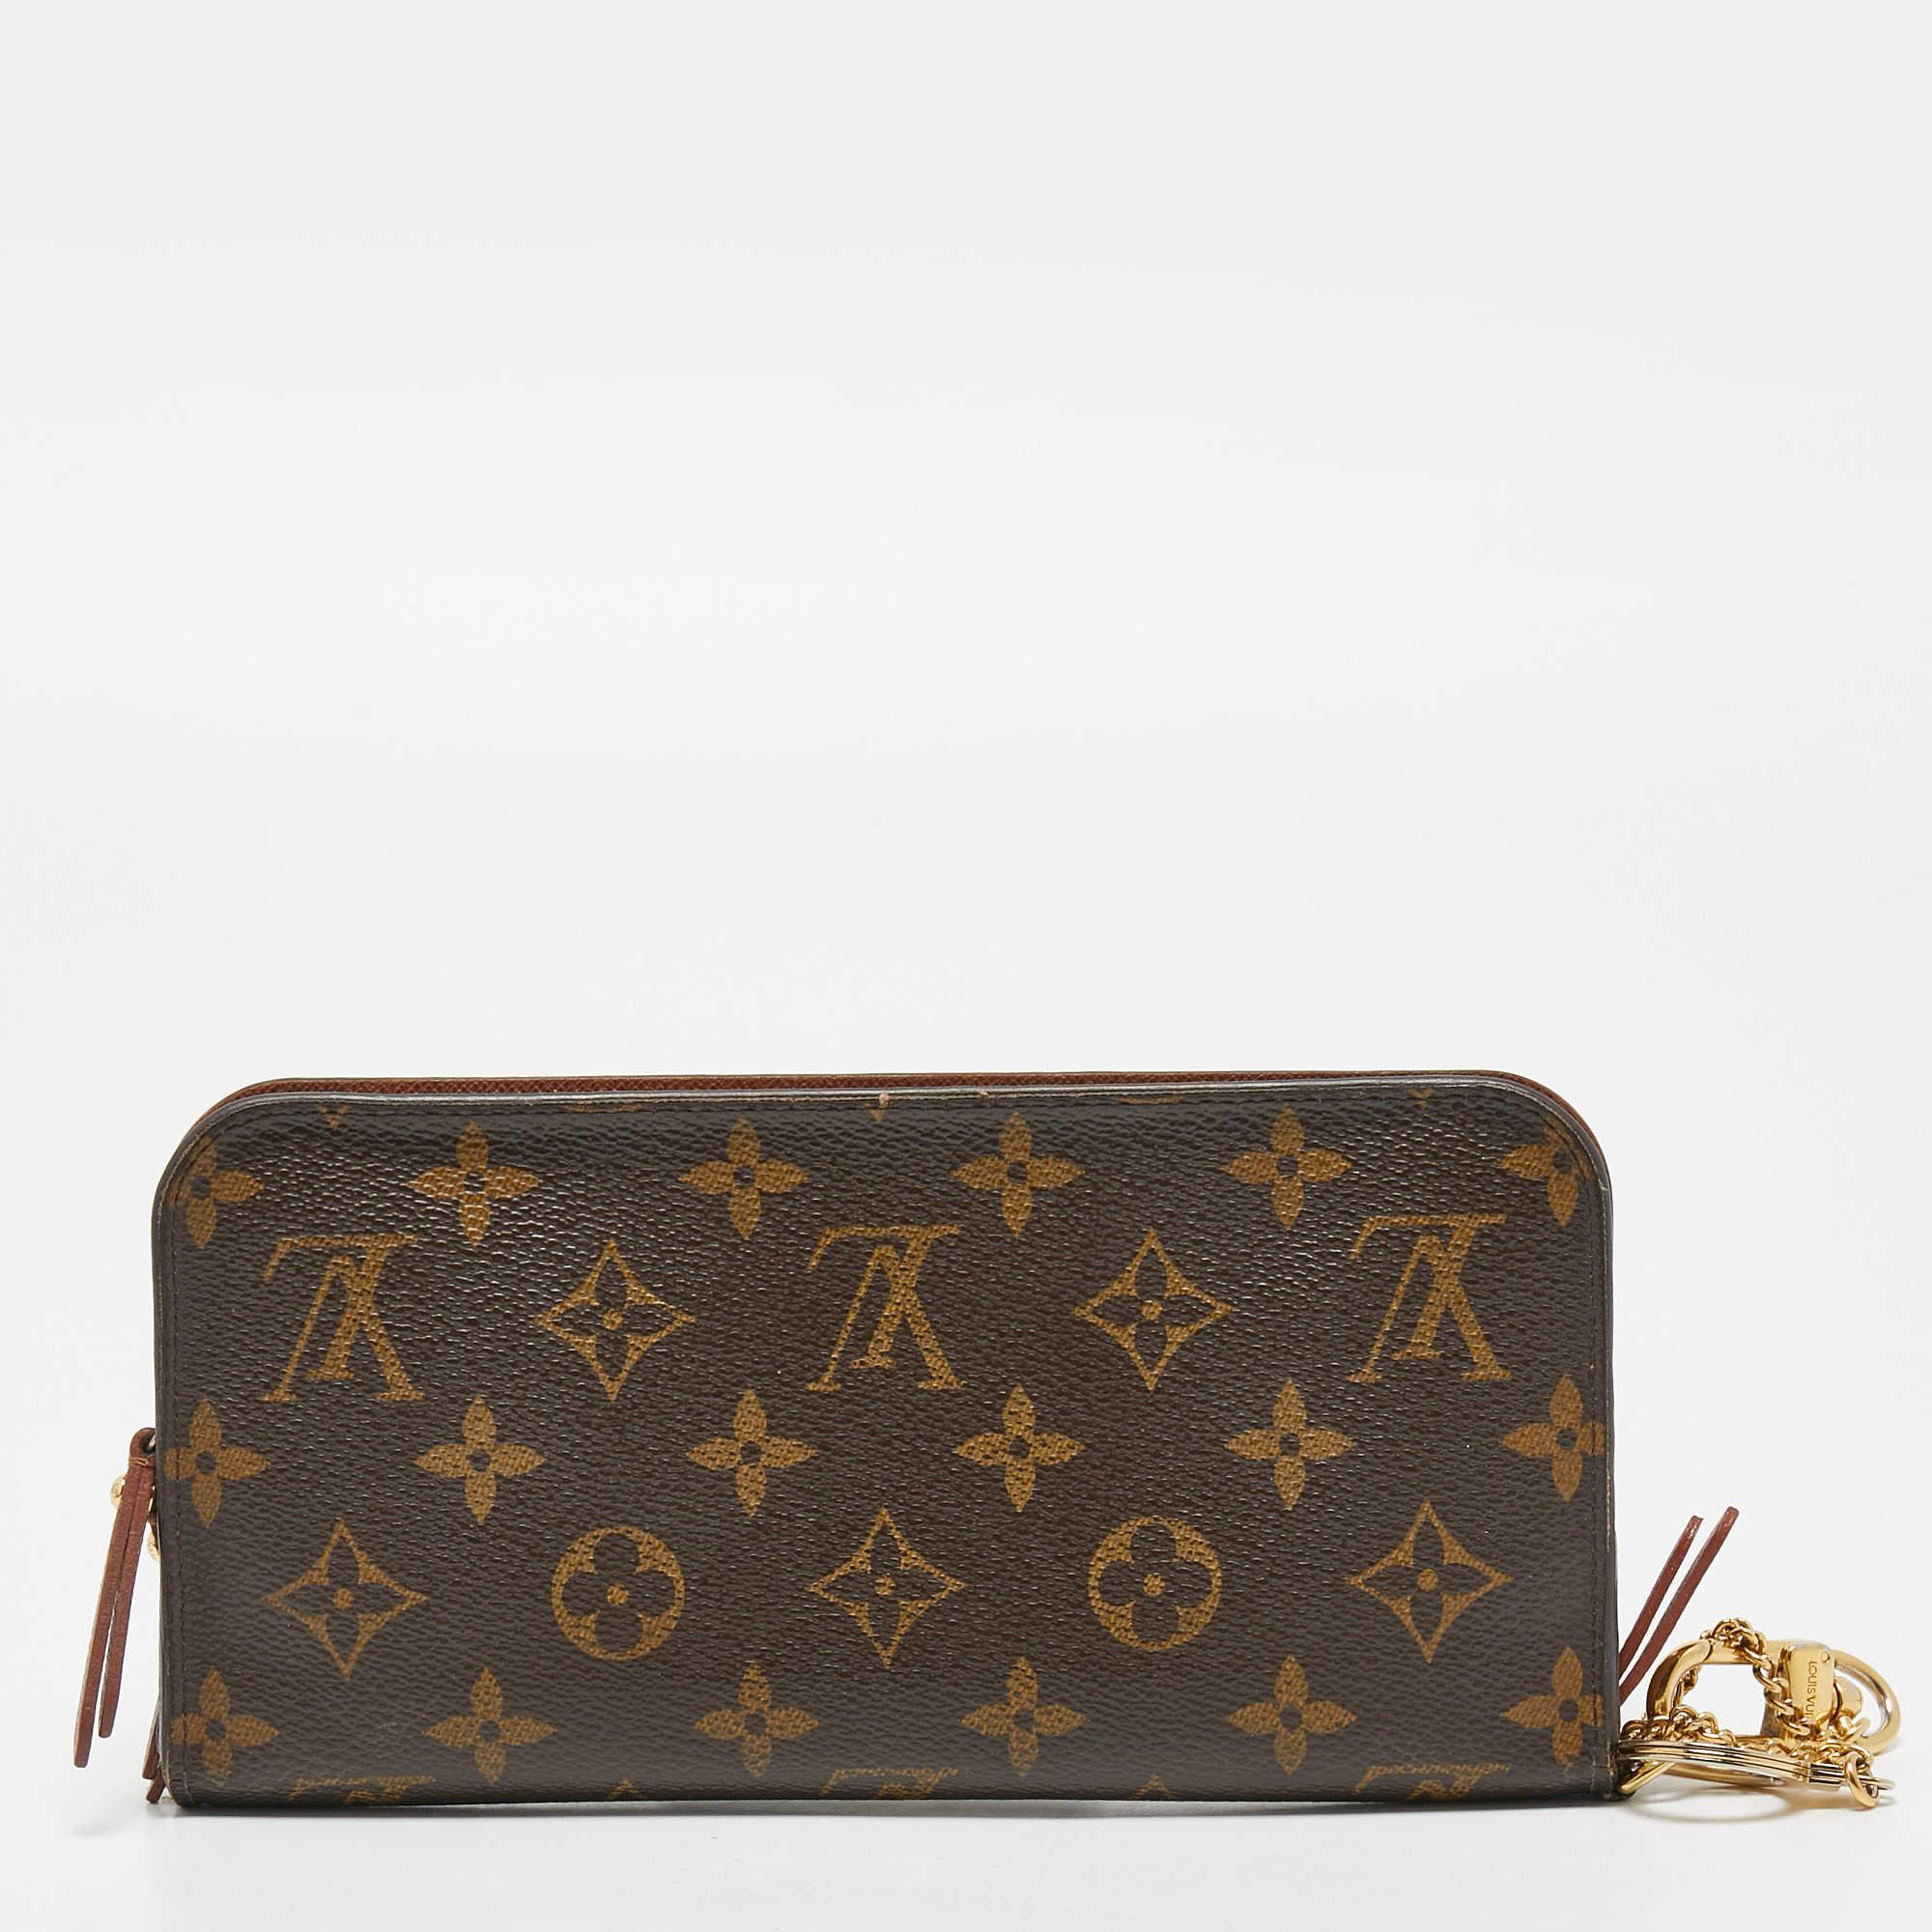 A wallet should be not only good-looking but also functional, just like this pretty Insolite from Louis Vuitton. Crafted in Spain, this gorgeous number flaunts the signature Monogram canvas exterior and has a zip compartment and snap buttons that